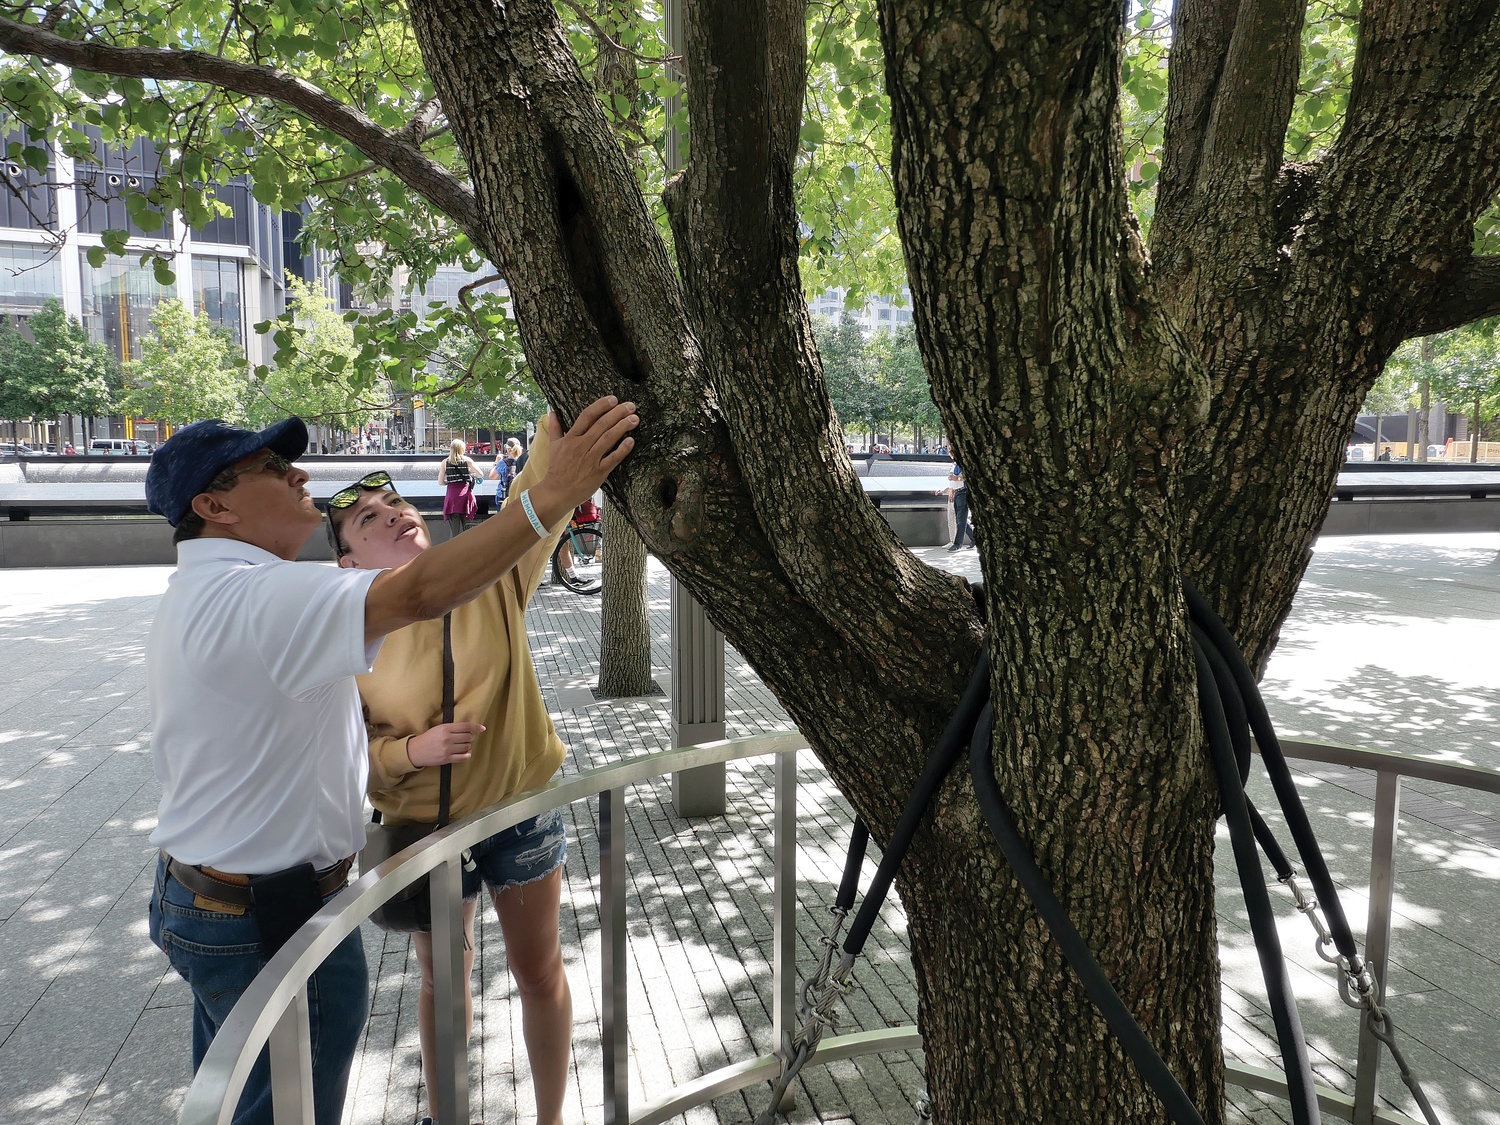 A man and a woman examine a Callery pear tree that became known as the “Survivor Tree” after it endured the 9/11 terror attacks at the World Trade Center.